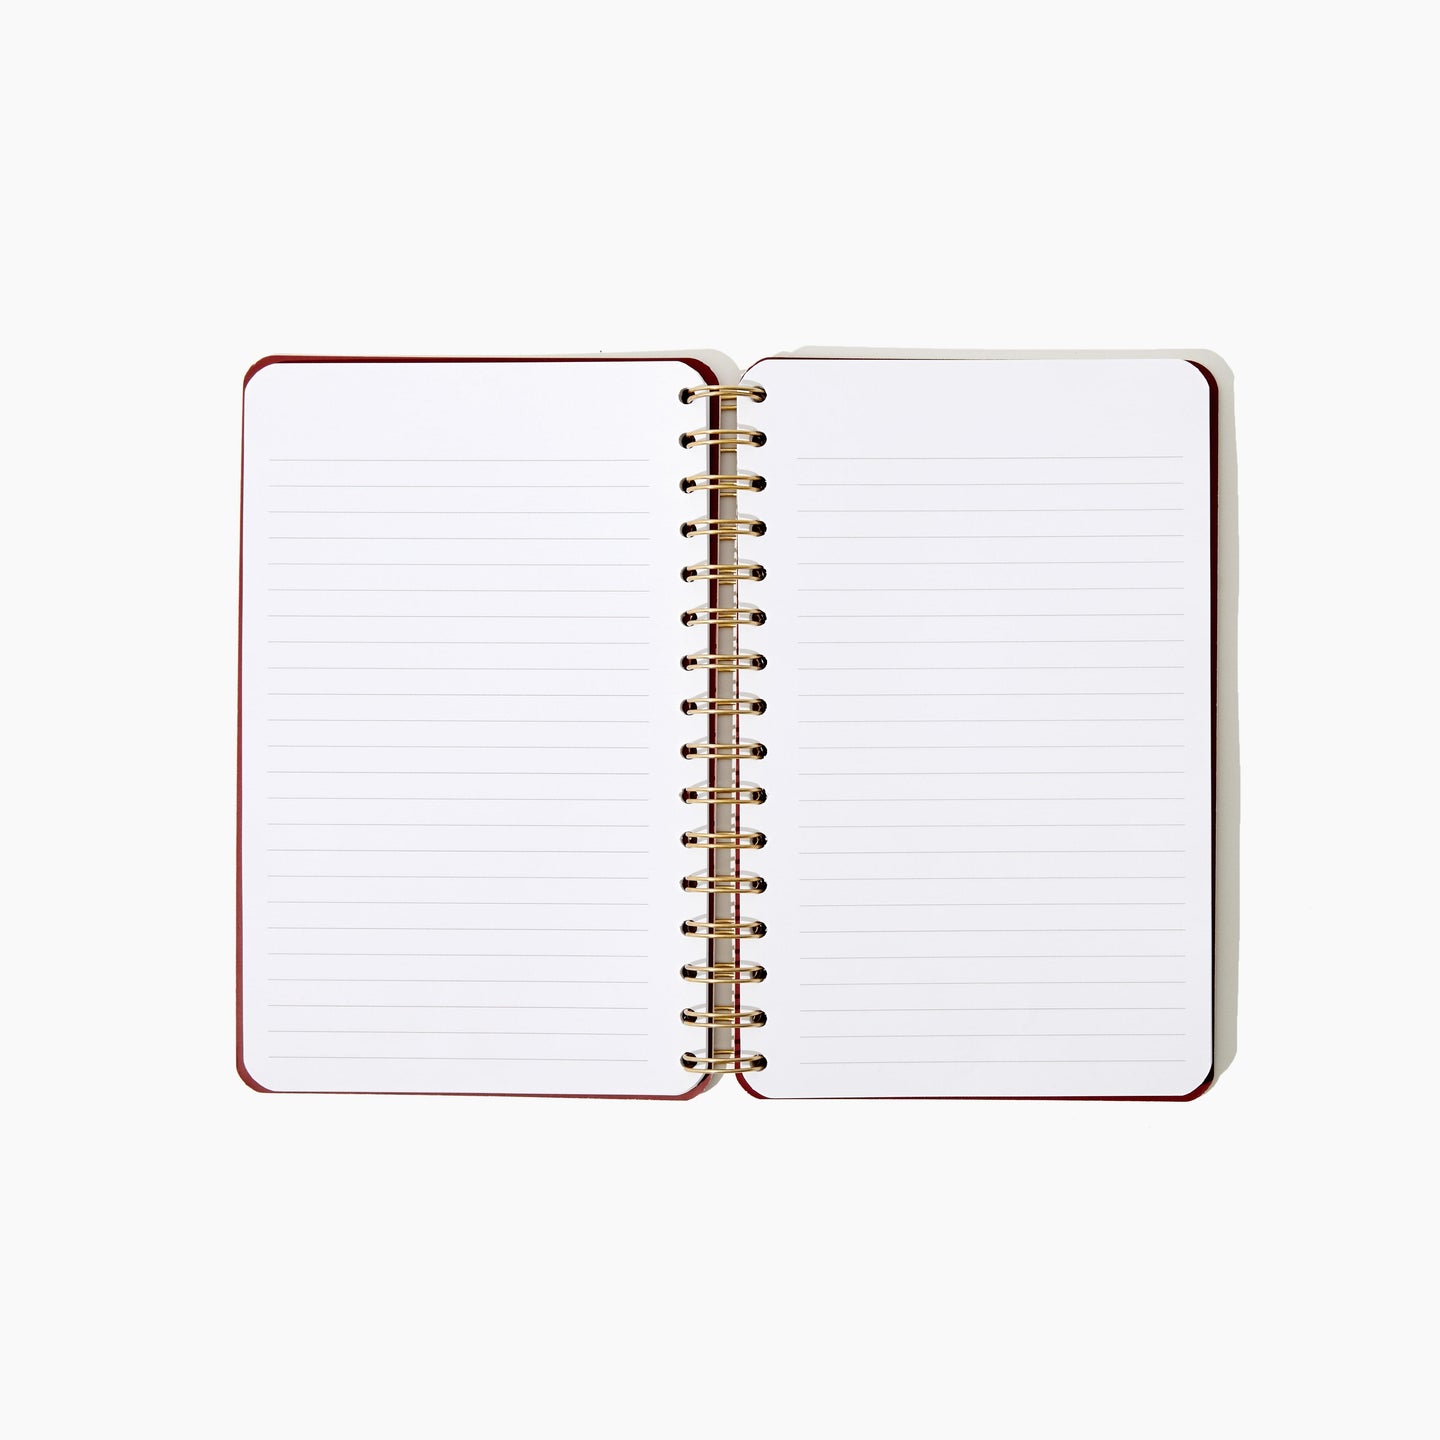 manifest your dreams spiral lined journal